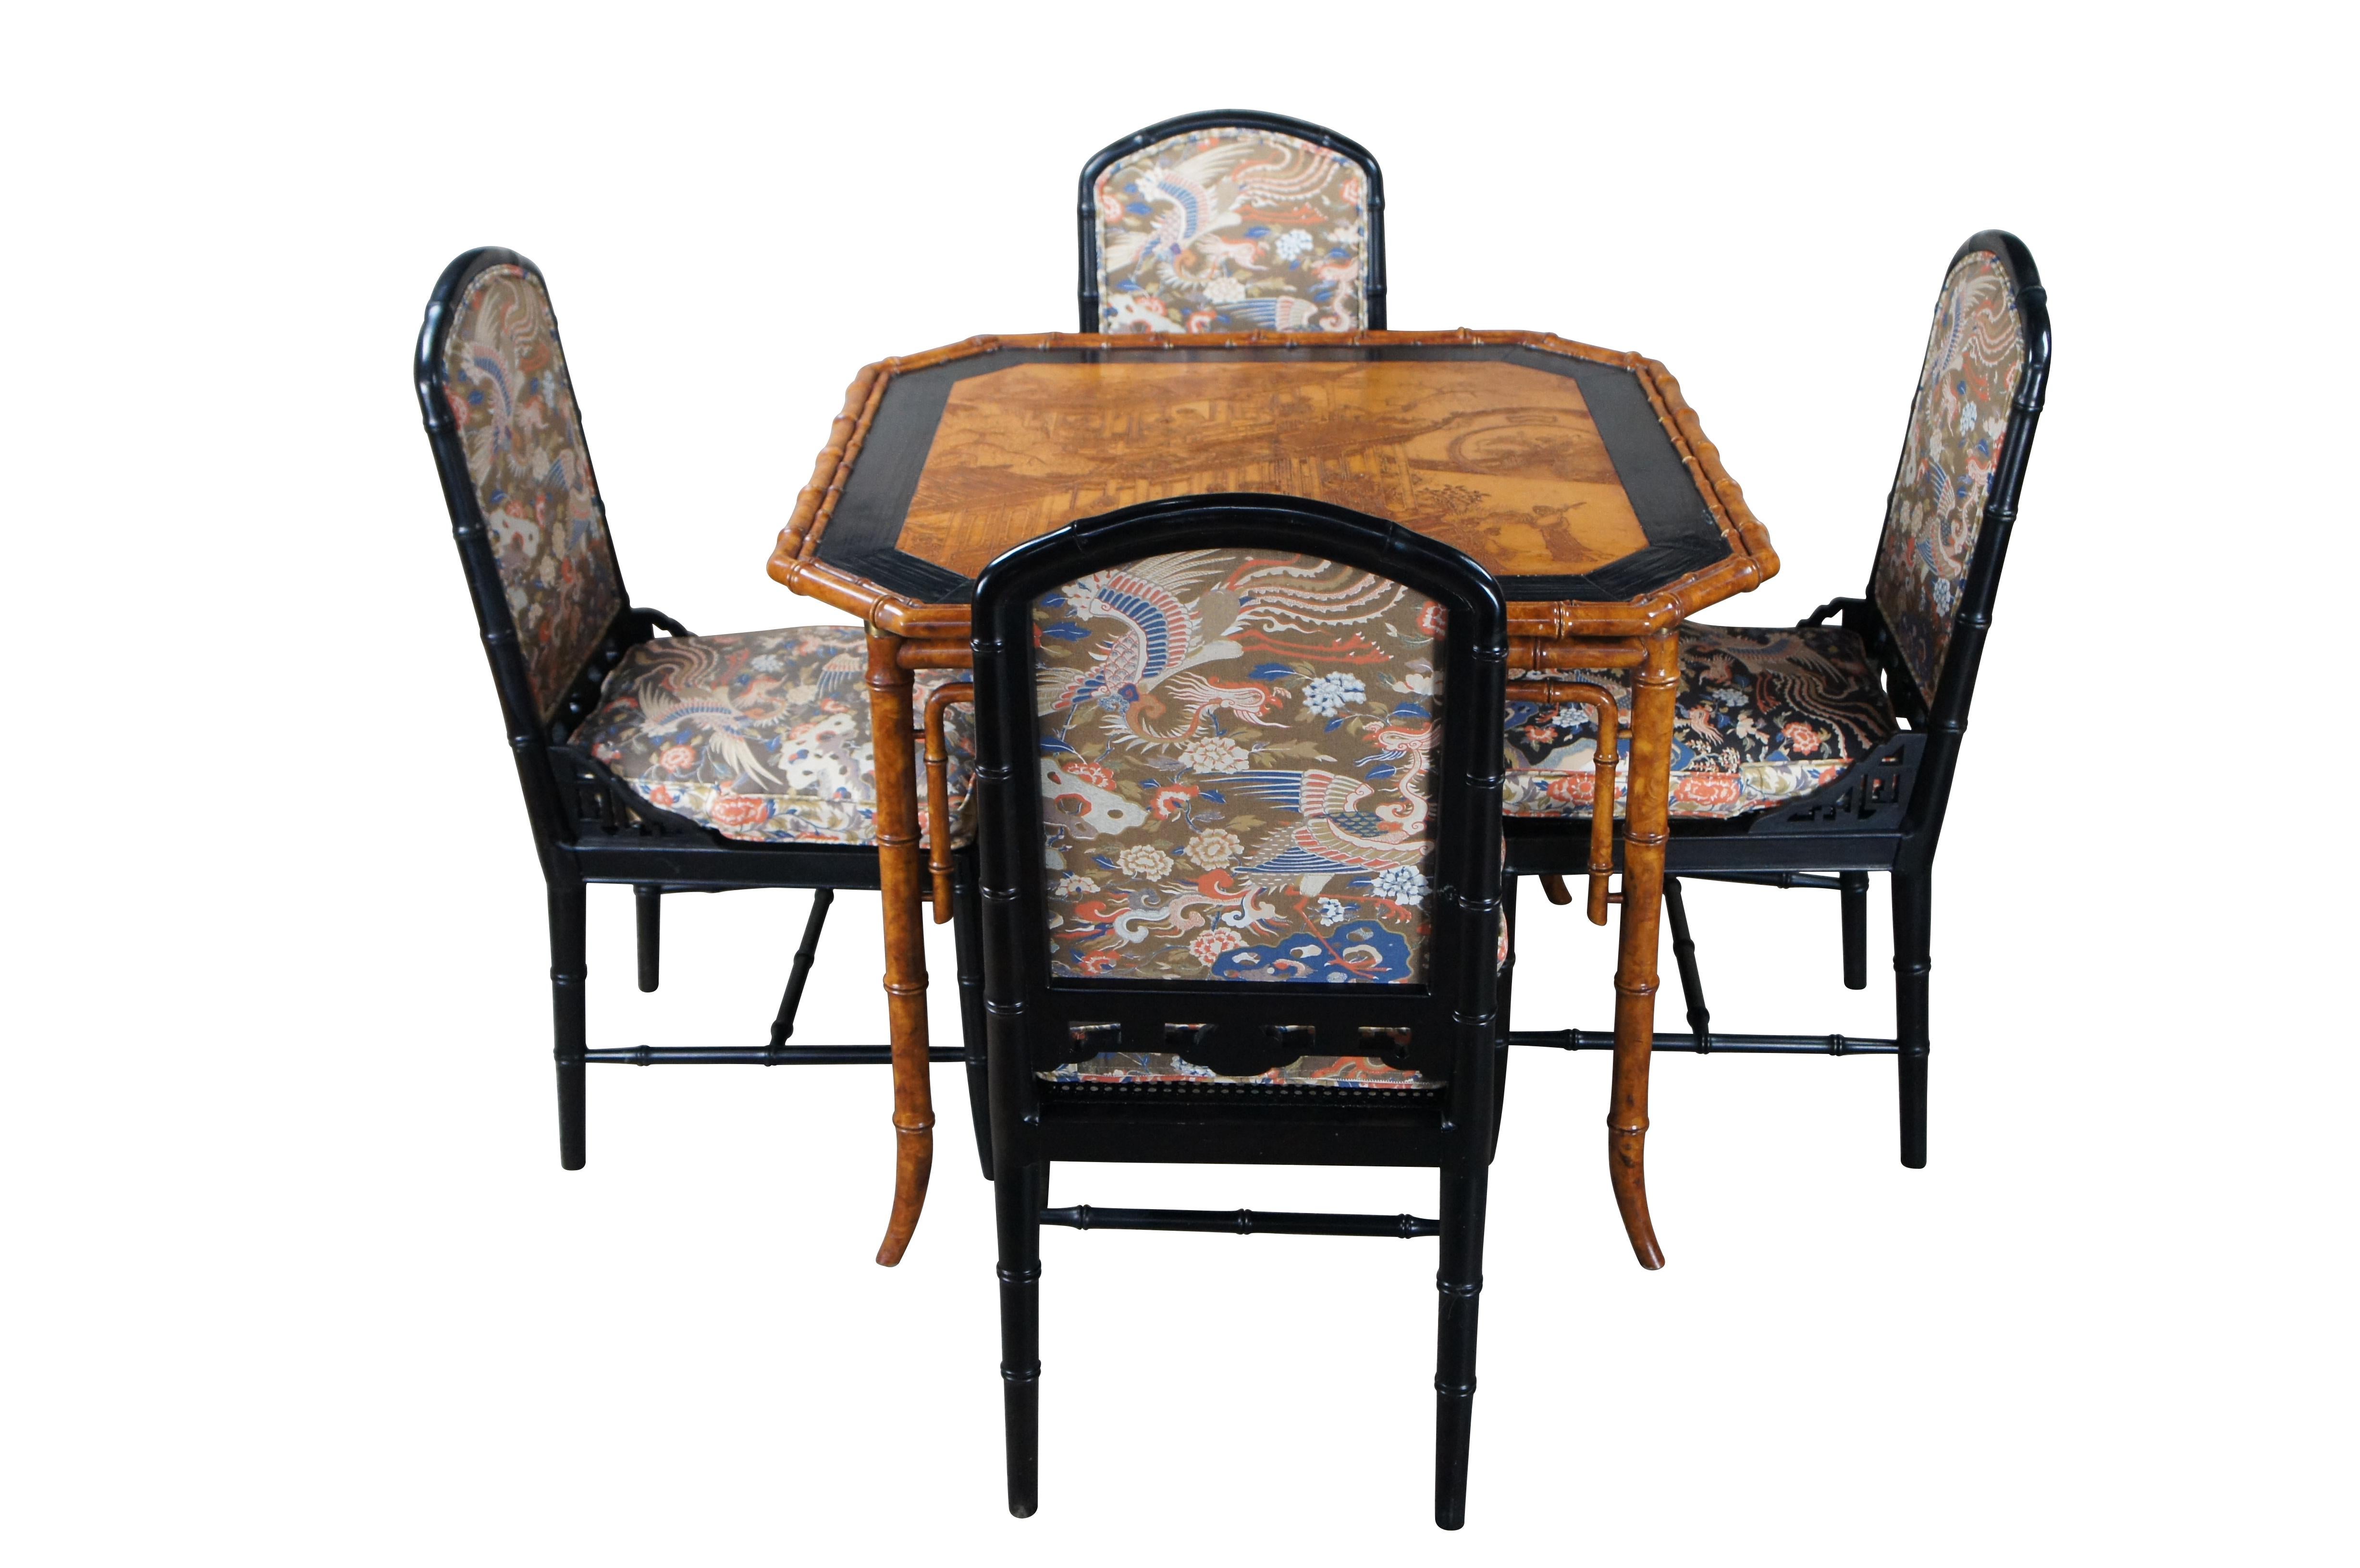 Mid 20th century game or card table and four caned chairs featuring faux bamboo and black lacquered design.  The table top features a Japanese Geisha house with large mooongate and fold out trays for drinks or game pieces.  The chairs feature a